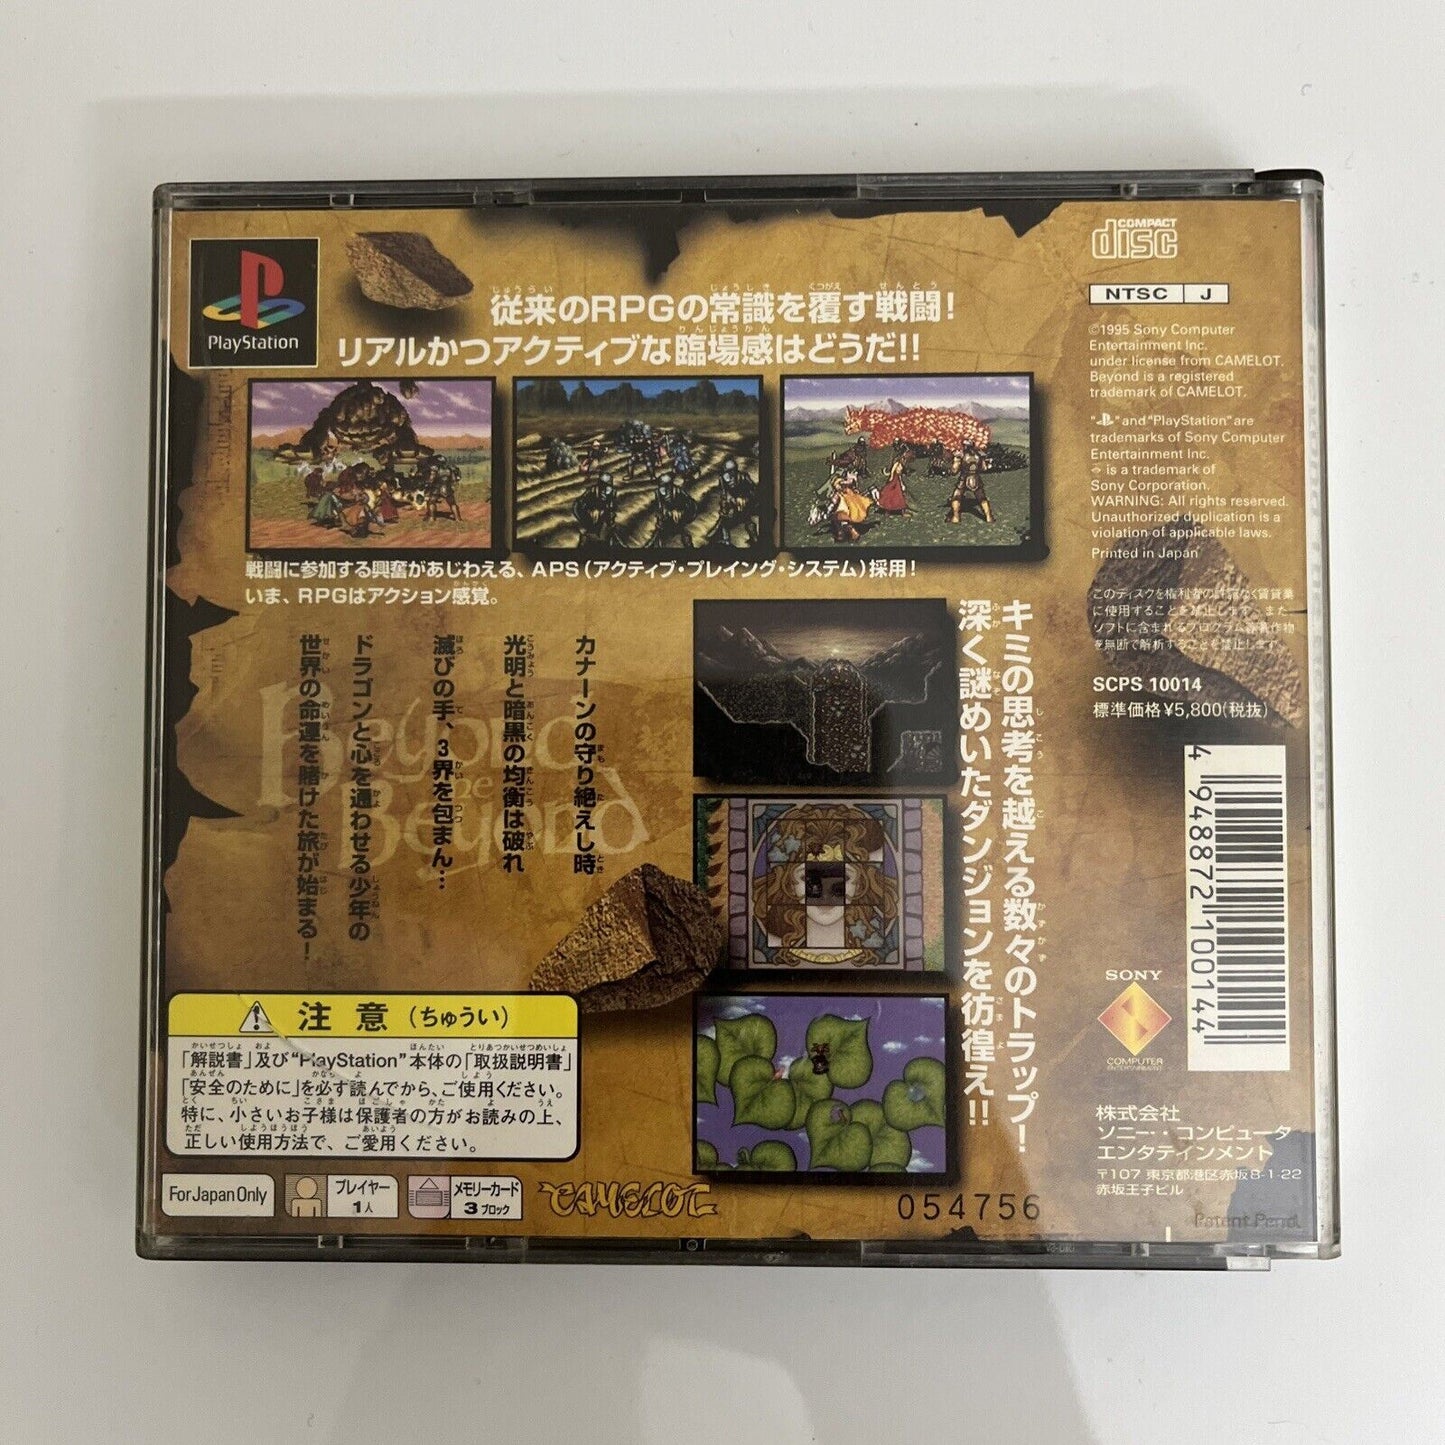 Beyond the Beyond - Sony PlayStation PS1 NTSC-J JAPAN 1995 RPG Game + Stickers